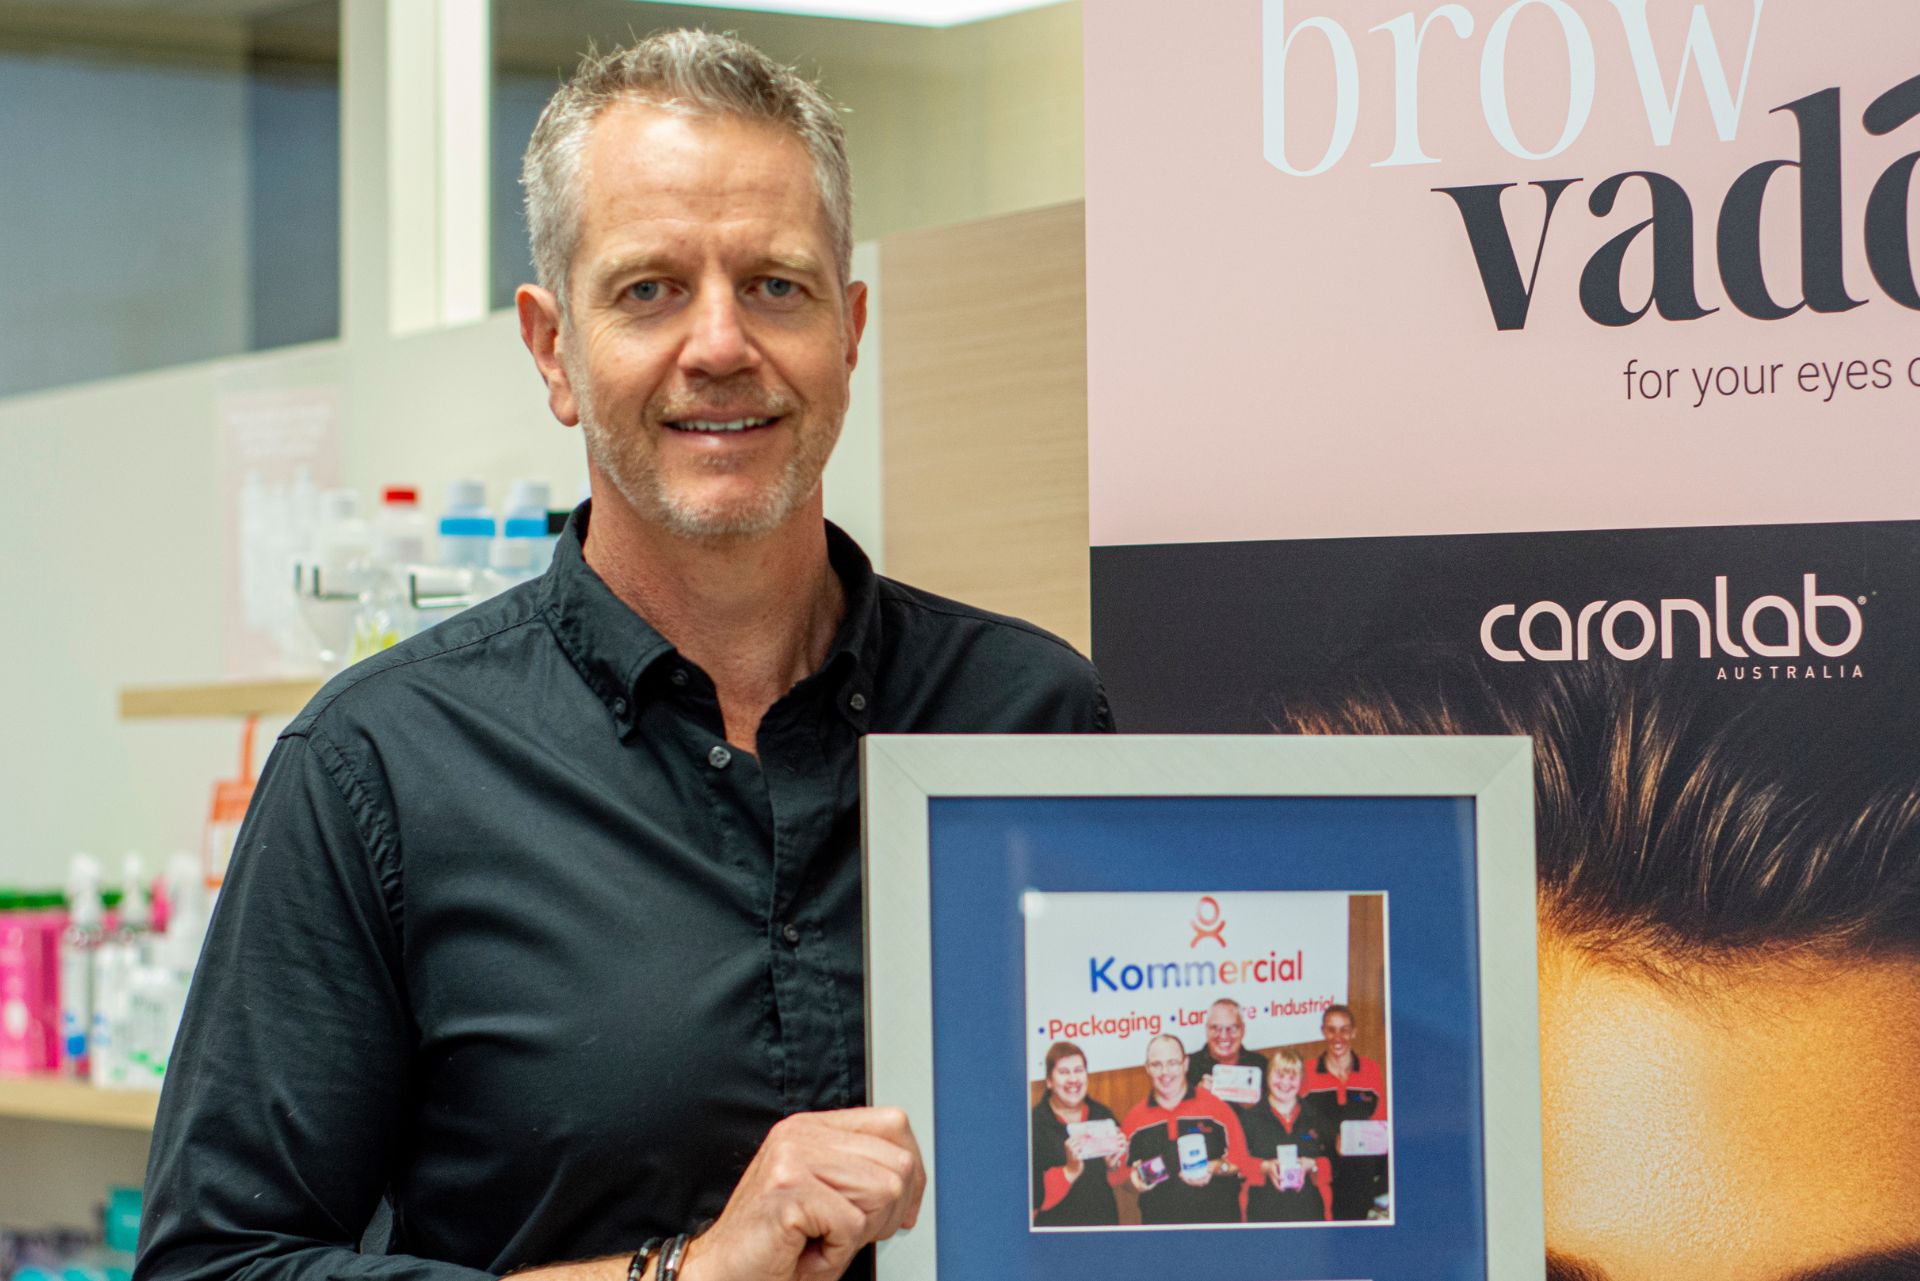 Caronlab have used genU’s Business Enterprises for more than 20 years. Caronlab CEO Greg Ure holds a 2018 plaque recognising the partnership: 1 millionth item packed milestone